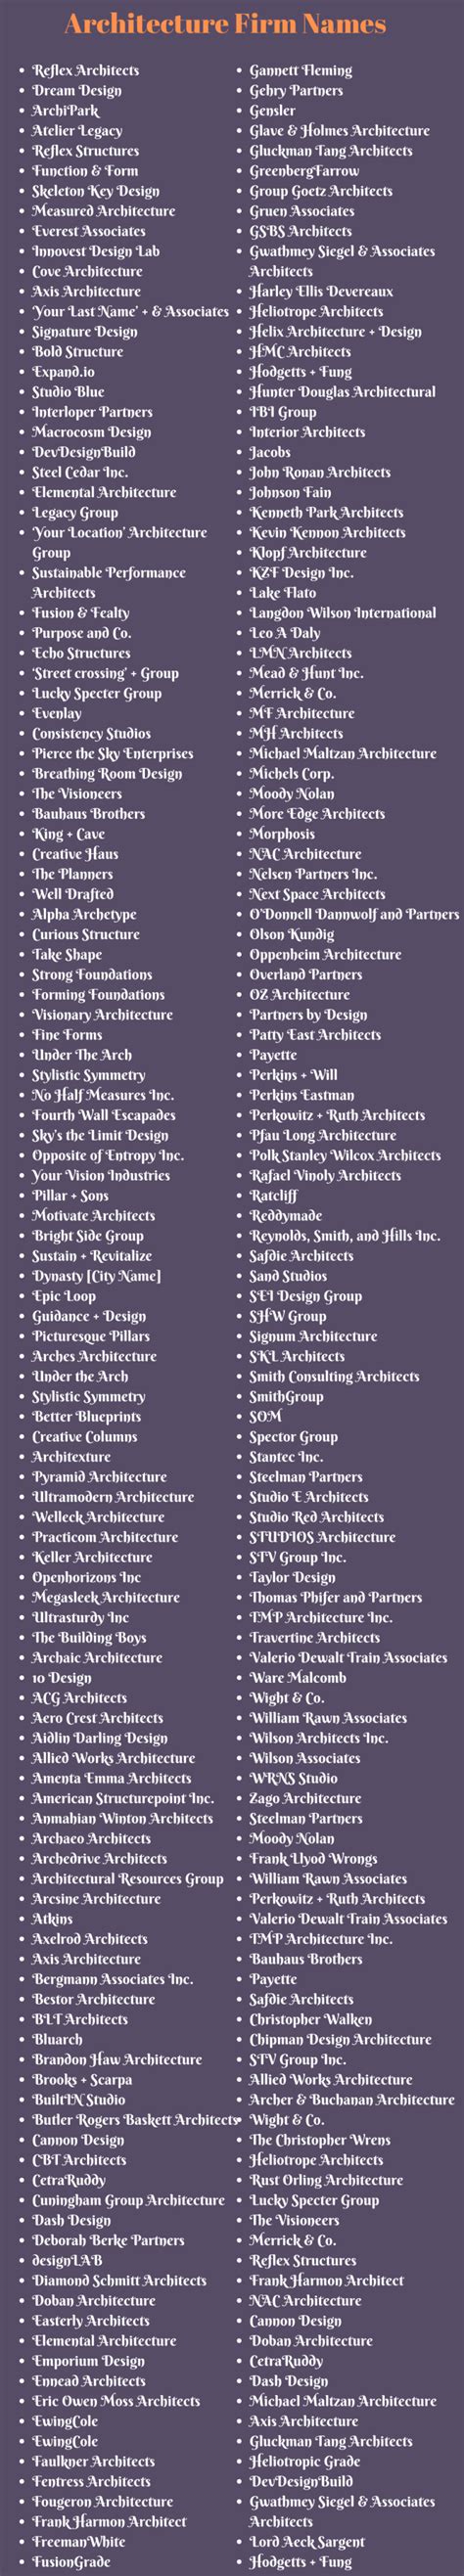 Architecture Firm Names 400 Architecture Company Names